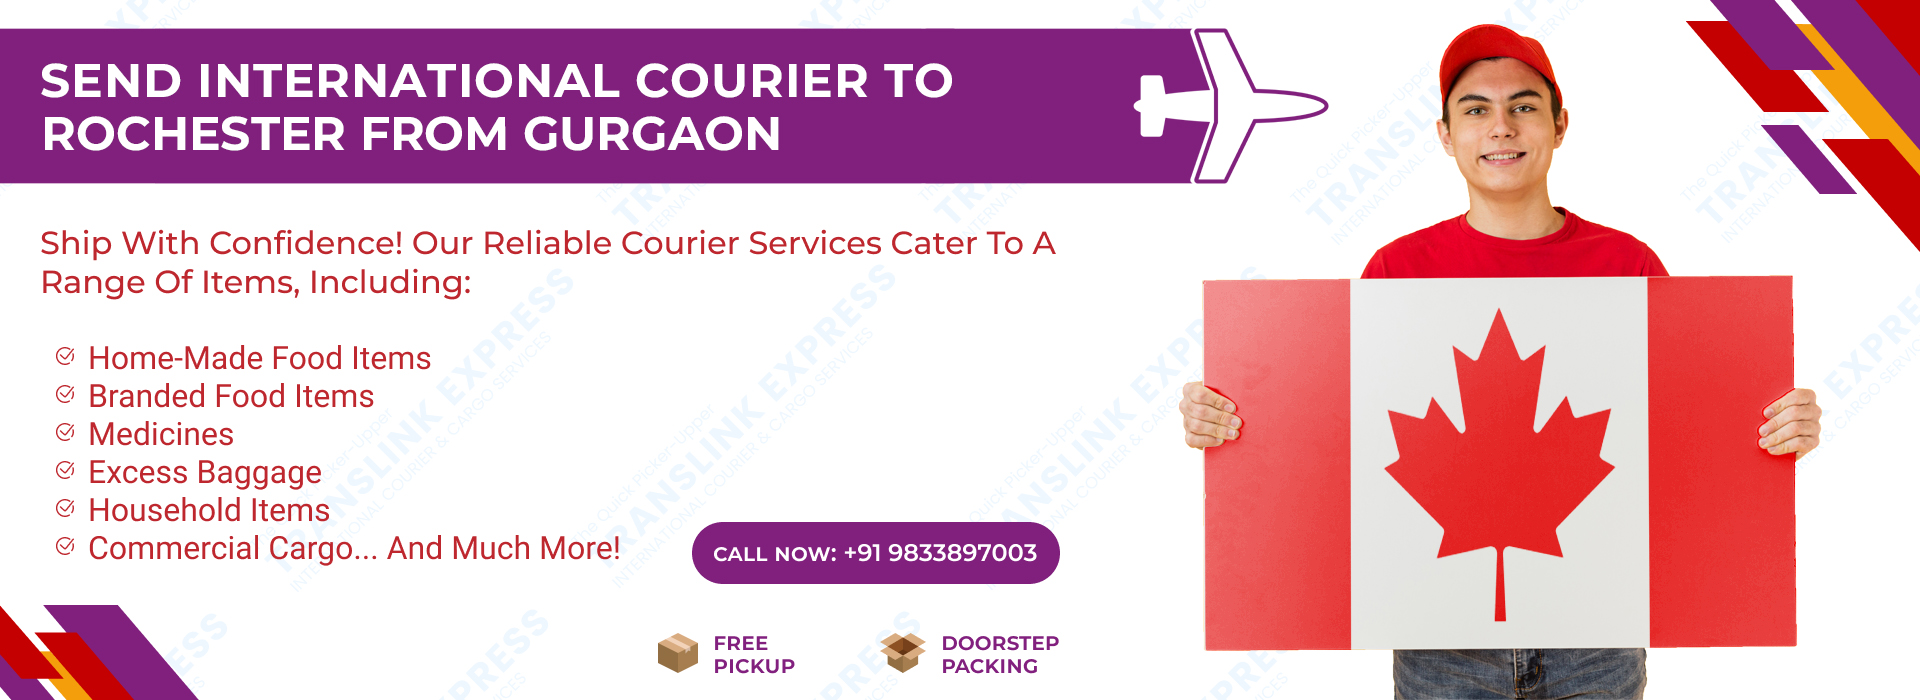 Courier to Rochester From Gurgaon